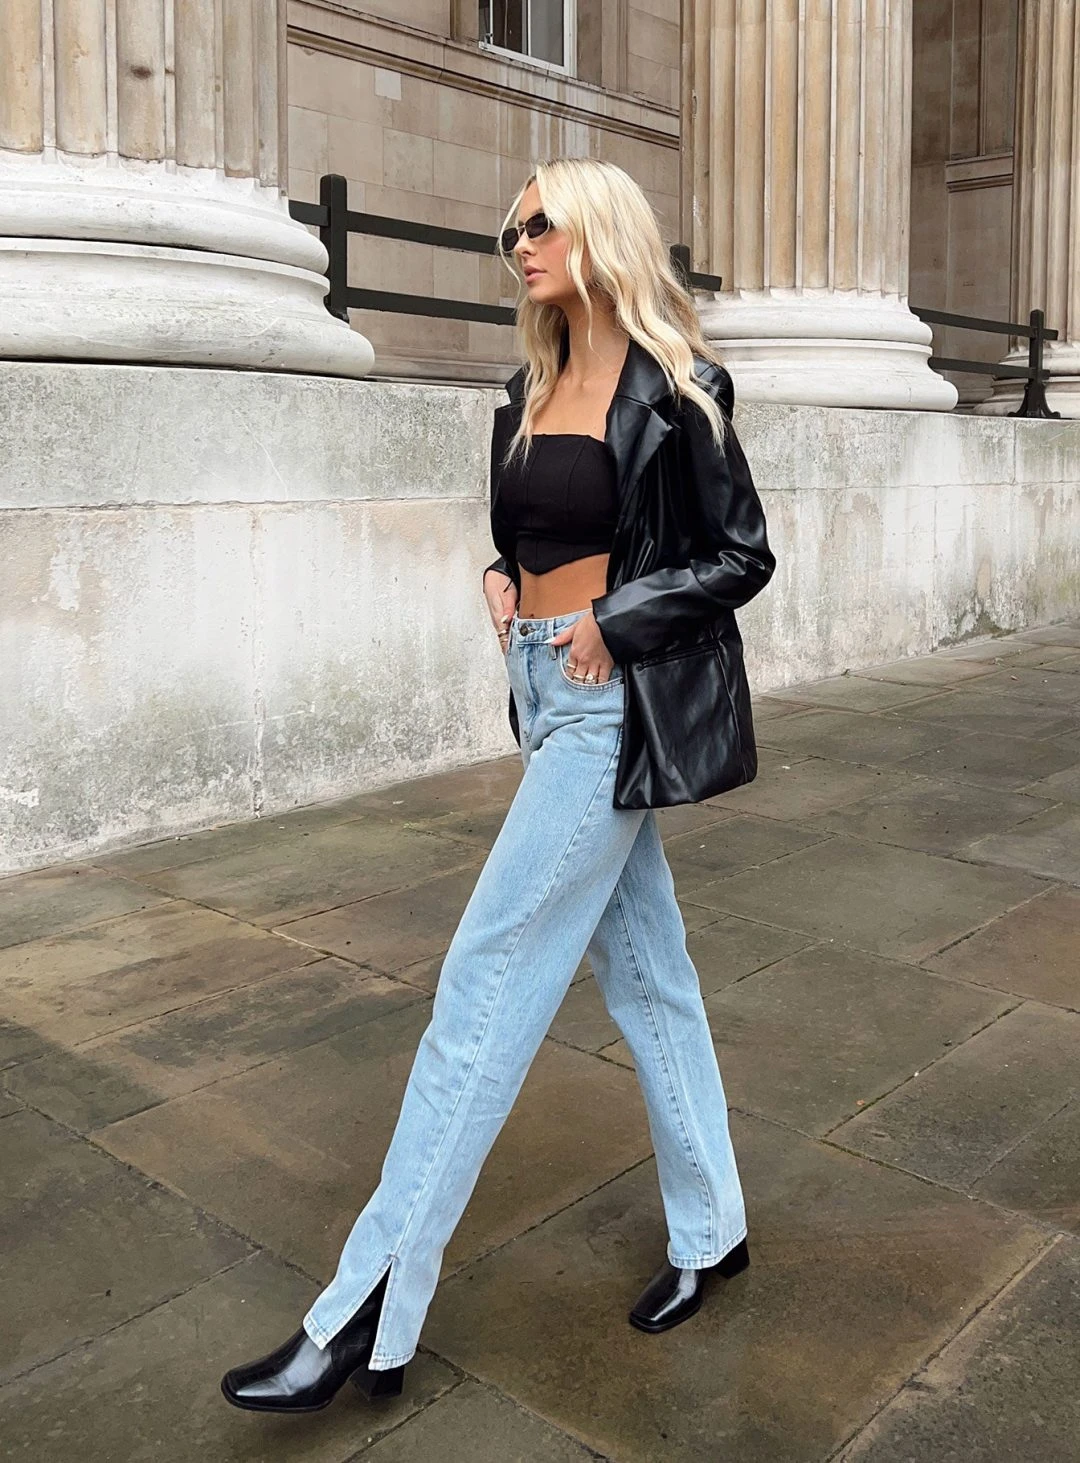 What shoes to wear with straight jeans to look chic and modern